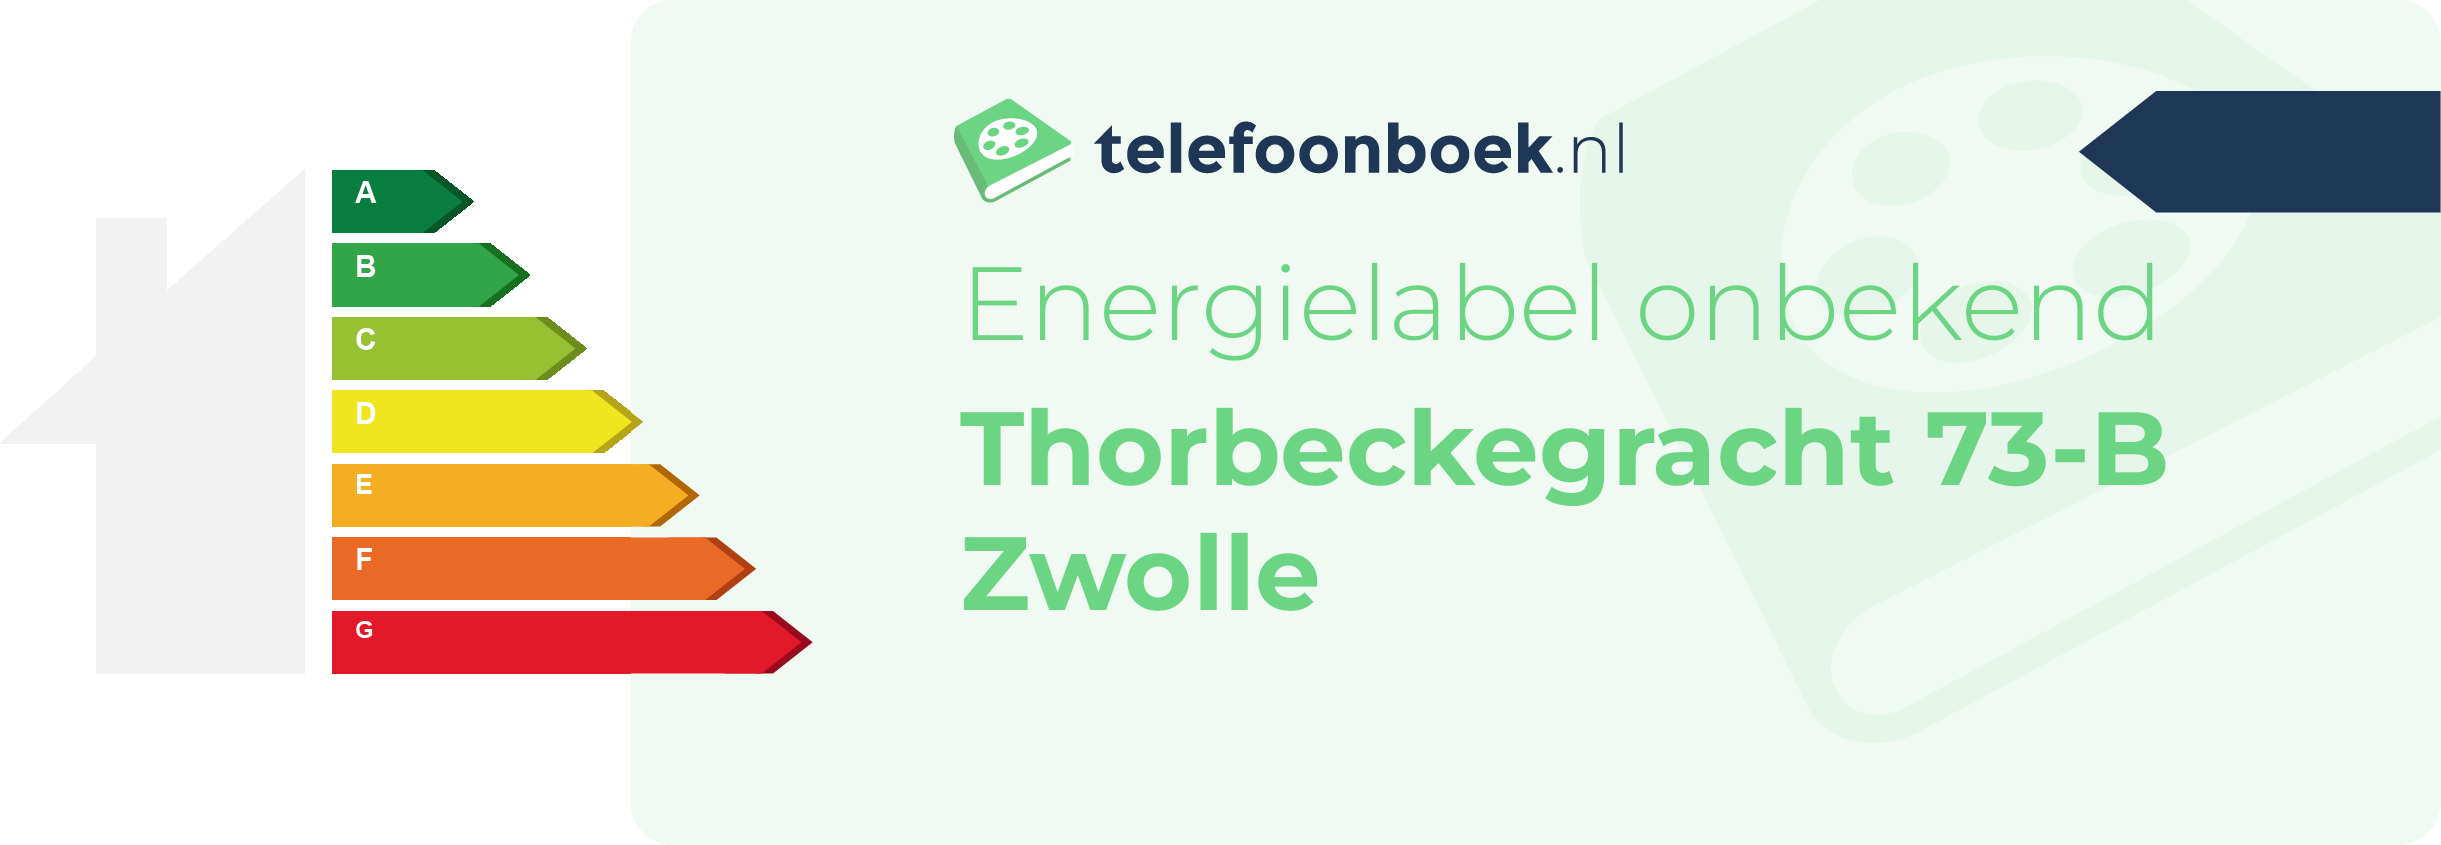 Energielabel Thorbeckegracht 73-B Zwolle